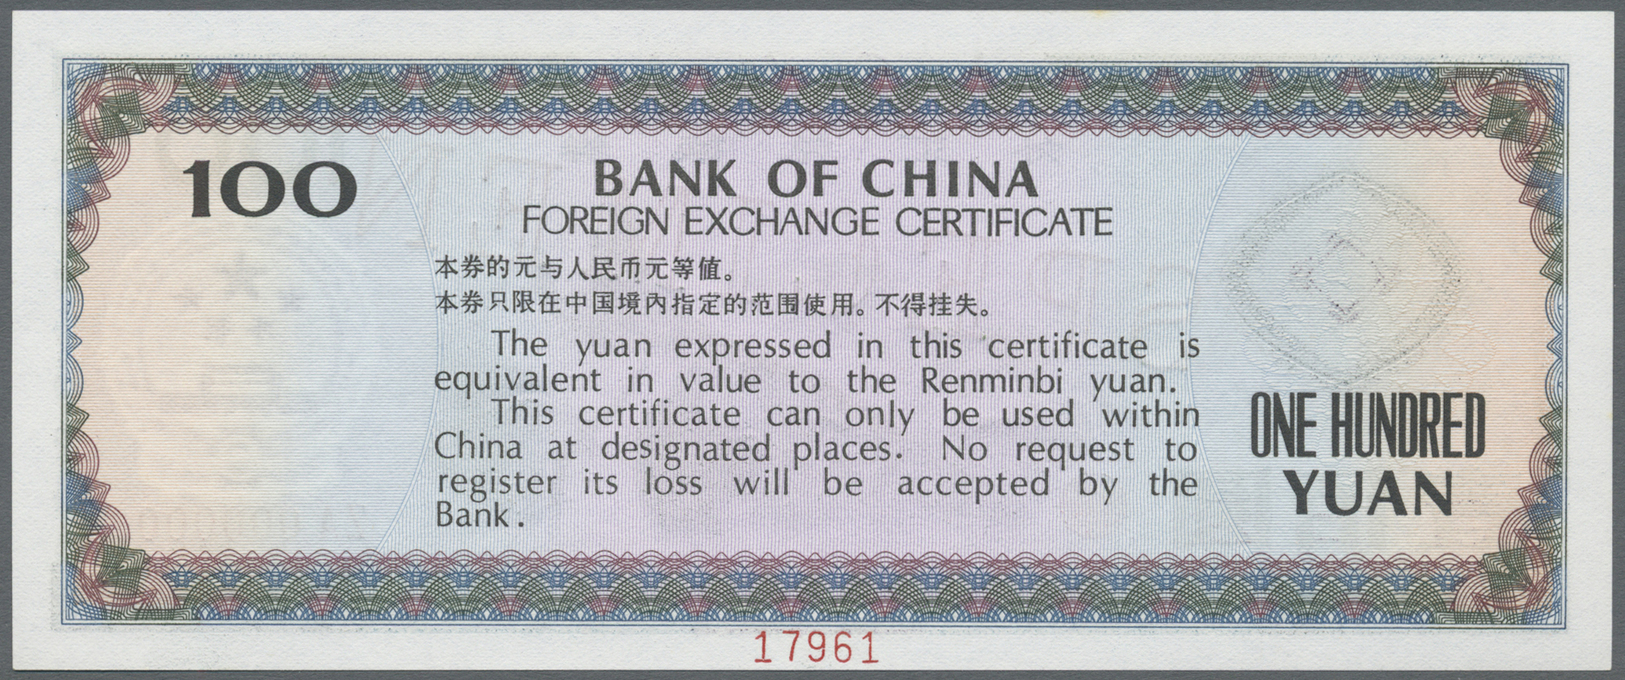 00555 China: 100 Yuan ND Foreign Exchange Certificate Specimen P. FX7s, In Condition: UNC. - Cina